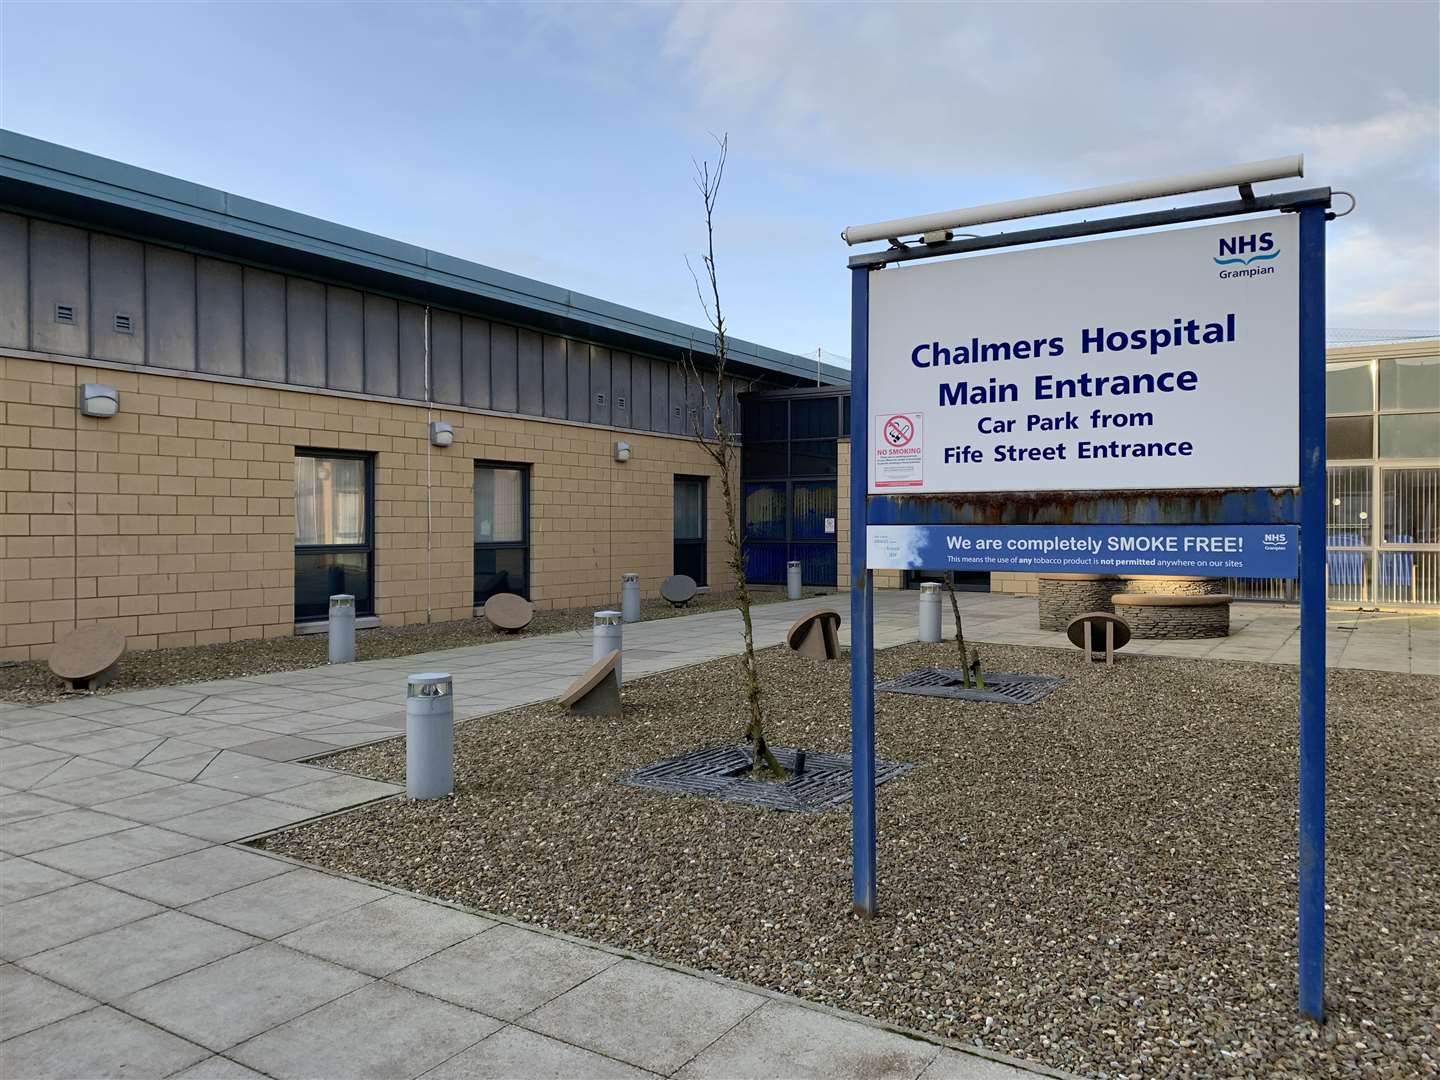 The minor injury unit at Banff's Chalmers Hospital overnight hours closure was discussed at Tuesday's Banff and Buchan Area Committee.